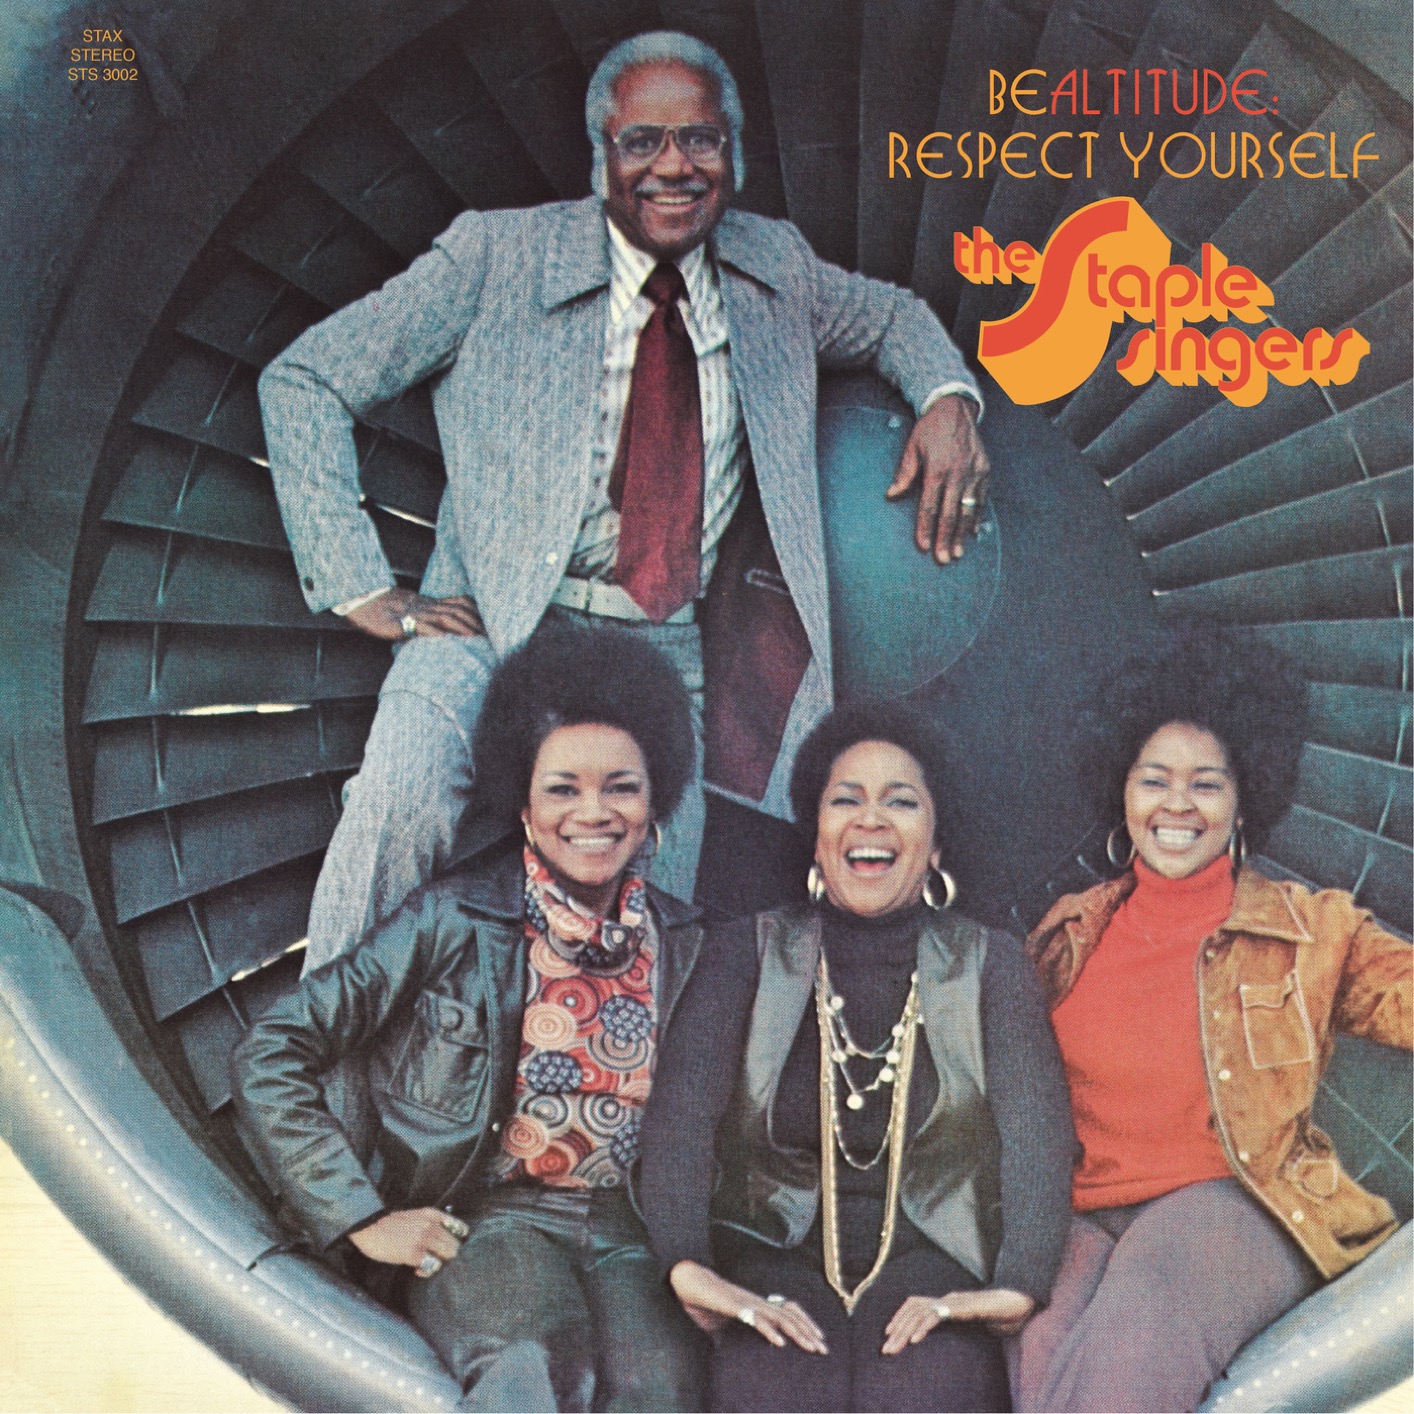 The Staple Singers - Be Altitude: Respect Yourself (Remastered) (1971/2019) [FLAC 24bit/192kHz]